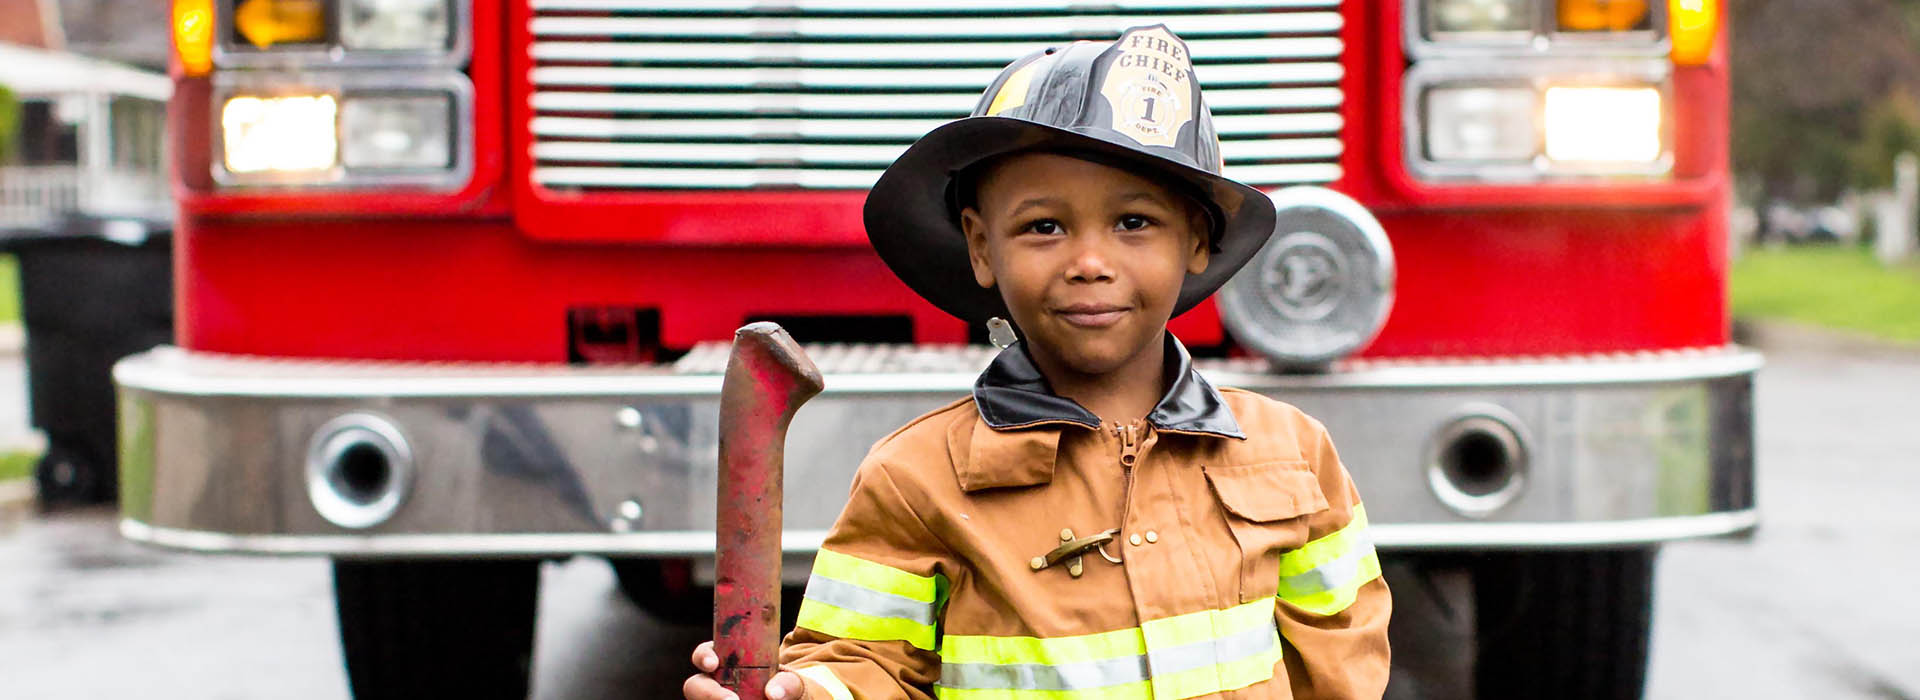 Child in a firefighter costume standing in front of a fire truck.